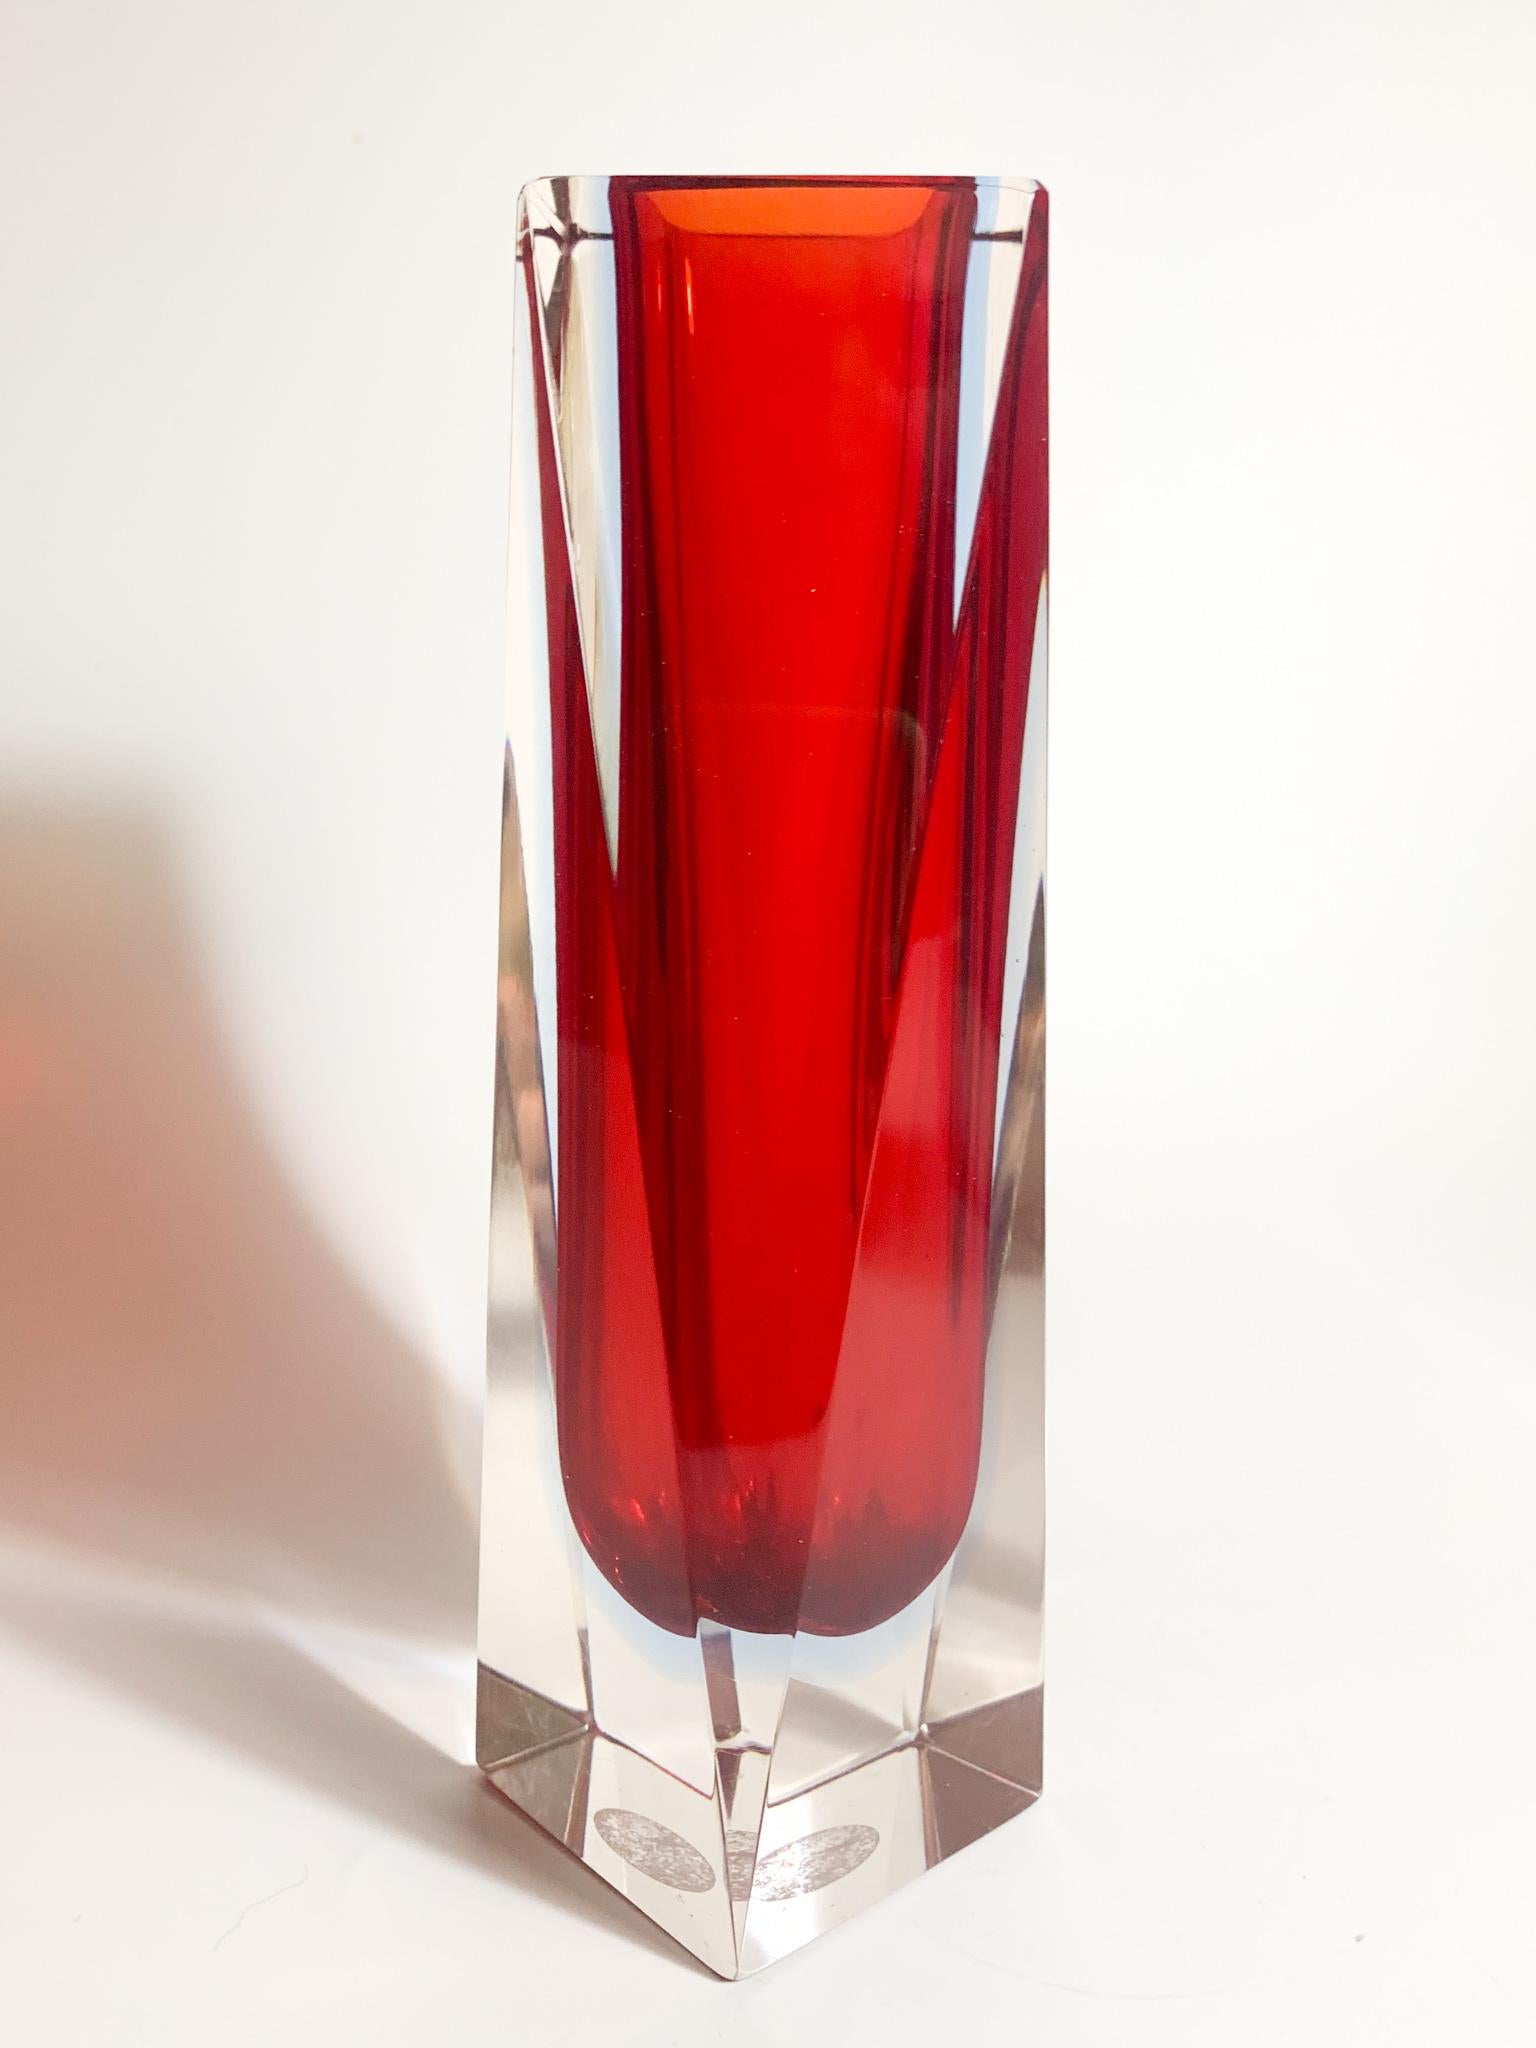 Late 20th Century Italy Geometric Vase in Red & Blue Murano Glass Attributed to Flavio Poli 1970s For Sale